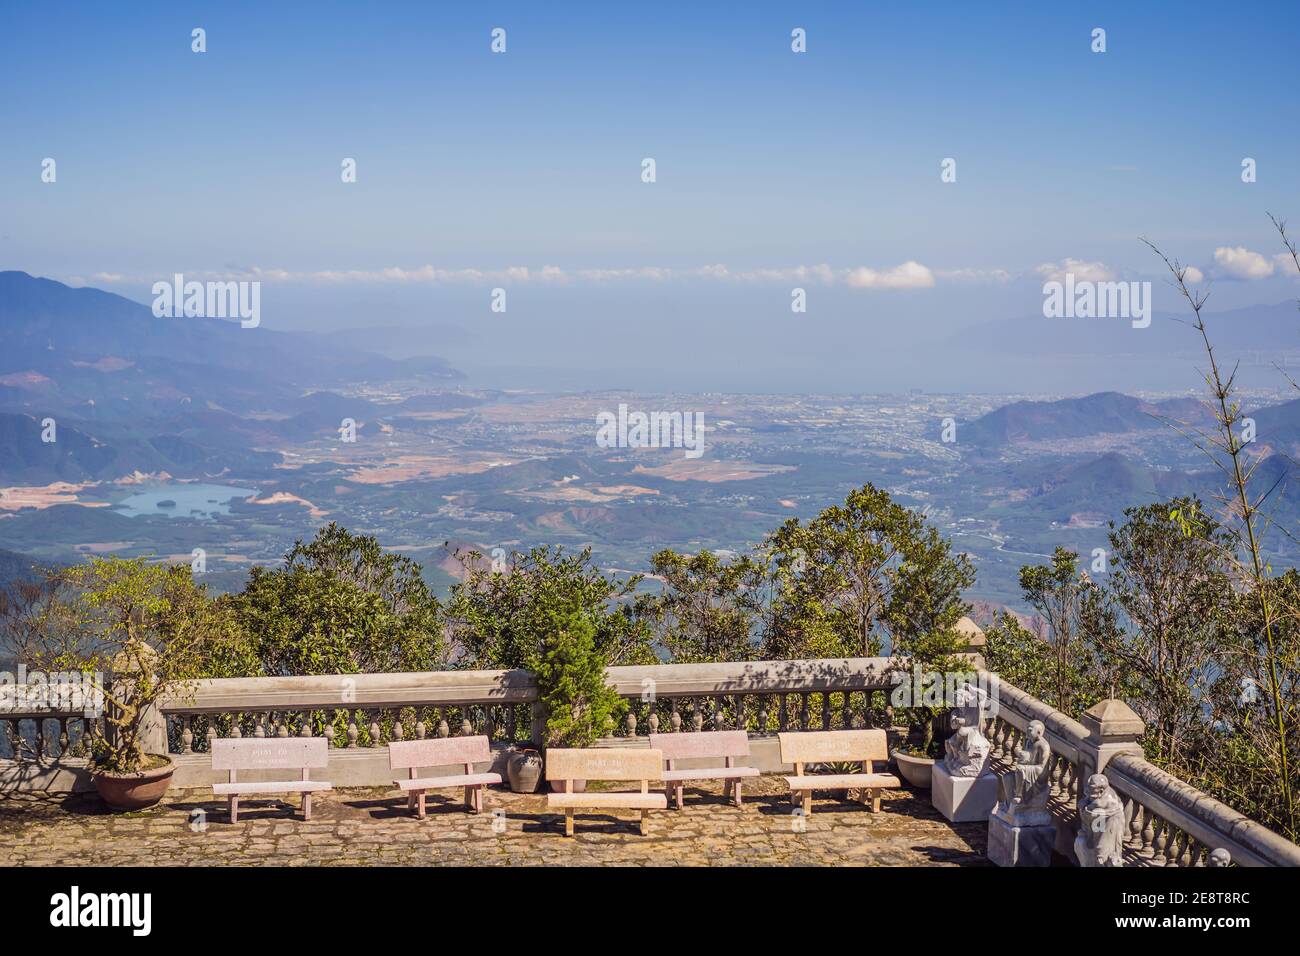 Famous tourist attraction - European city at the top of the Ba Na Hills, Vietnam Stock Photo